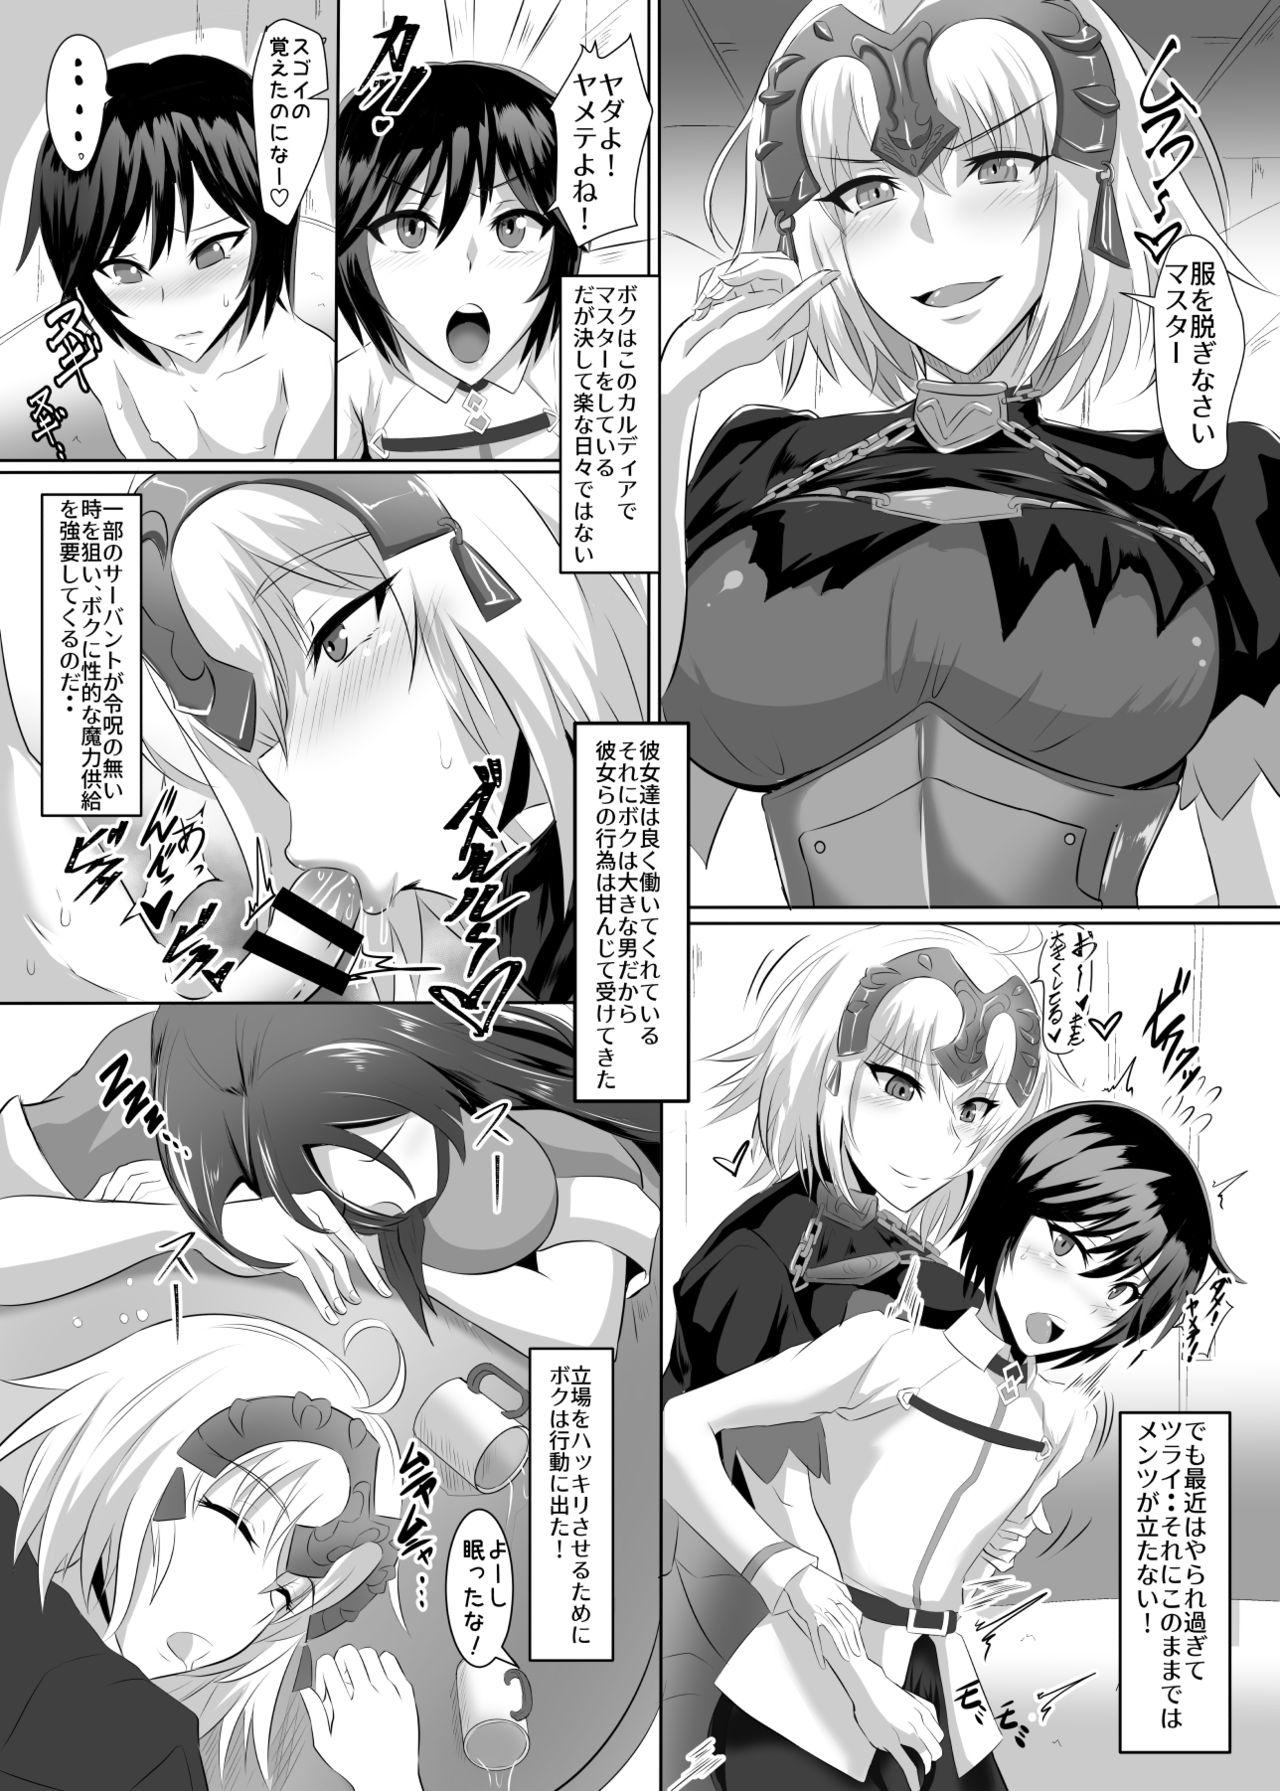 Leite Gehenna 7 - Fate grand order Woman Fucking - Page 4